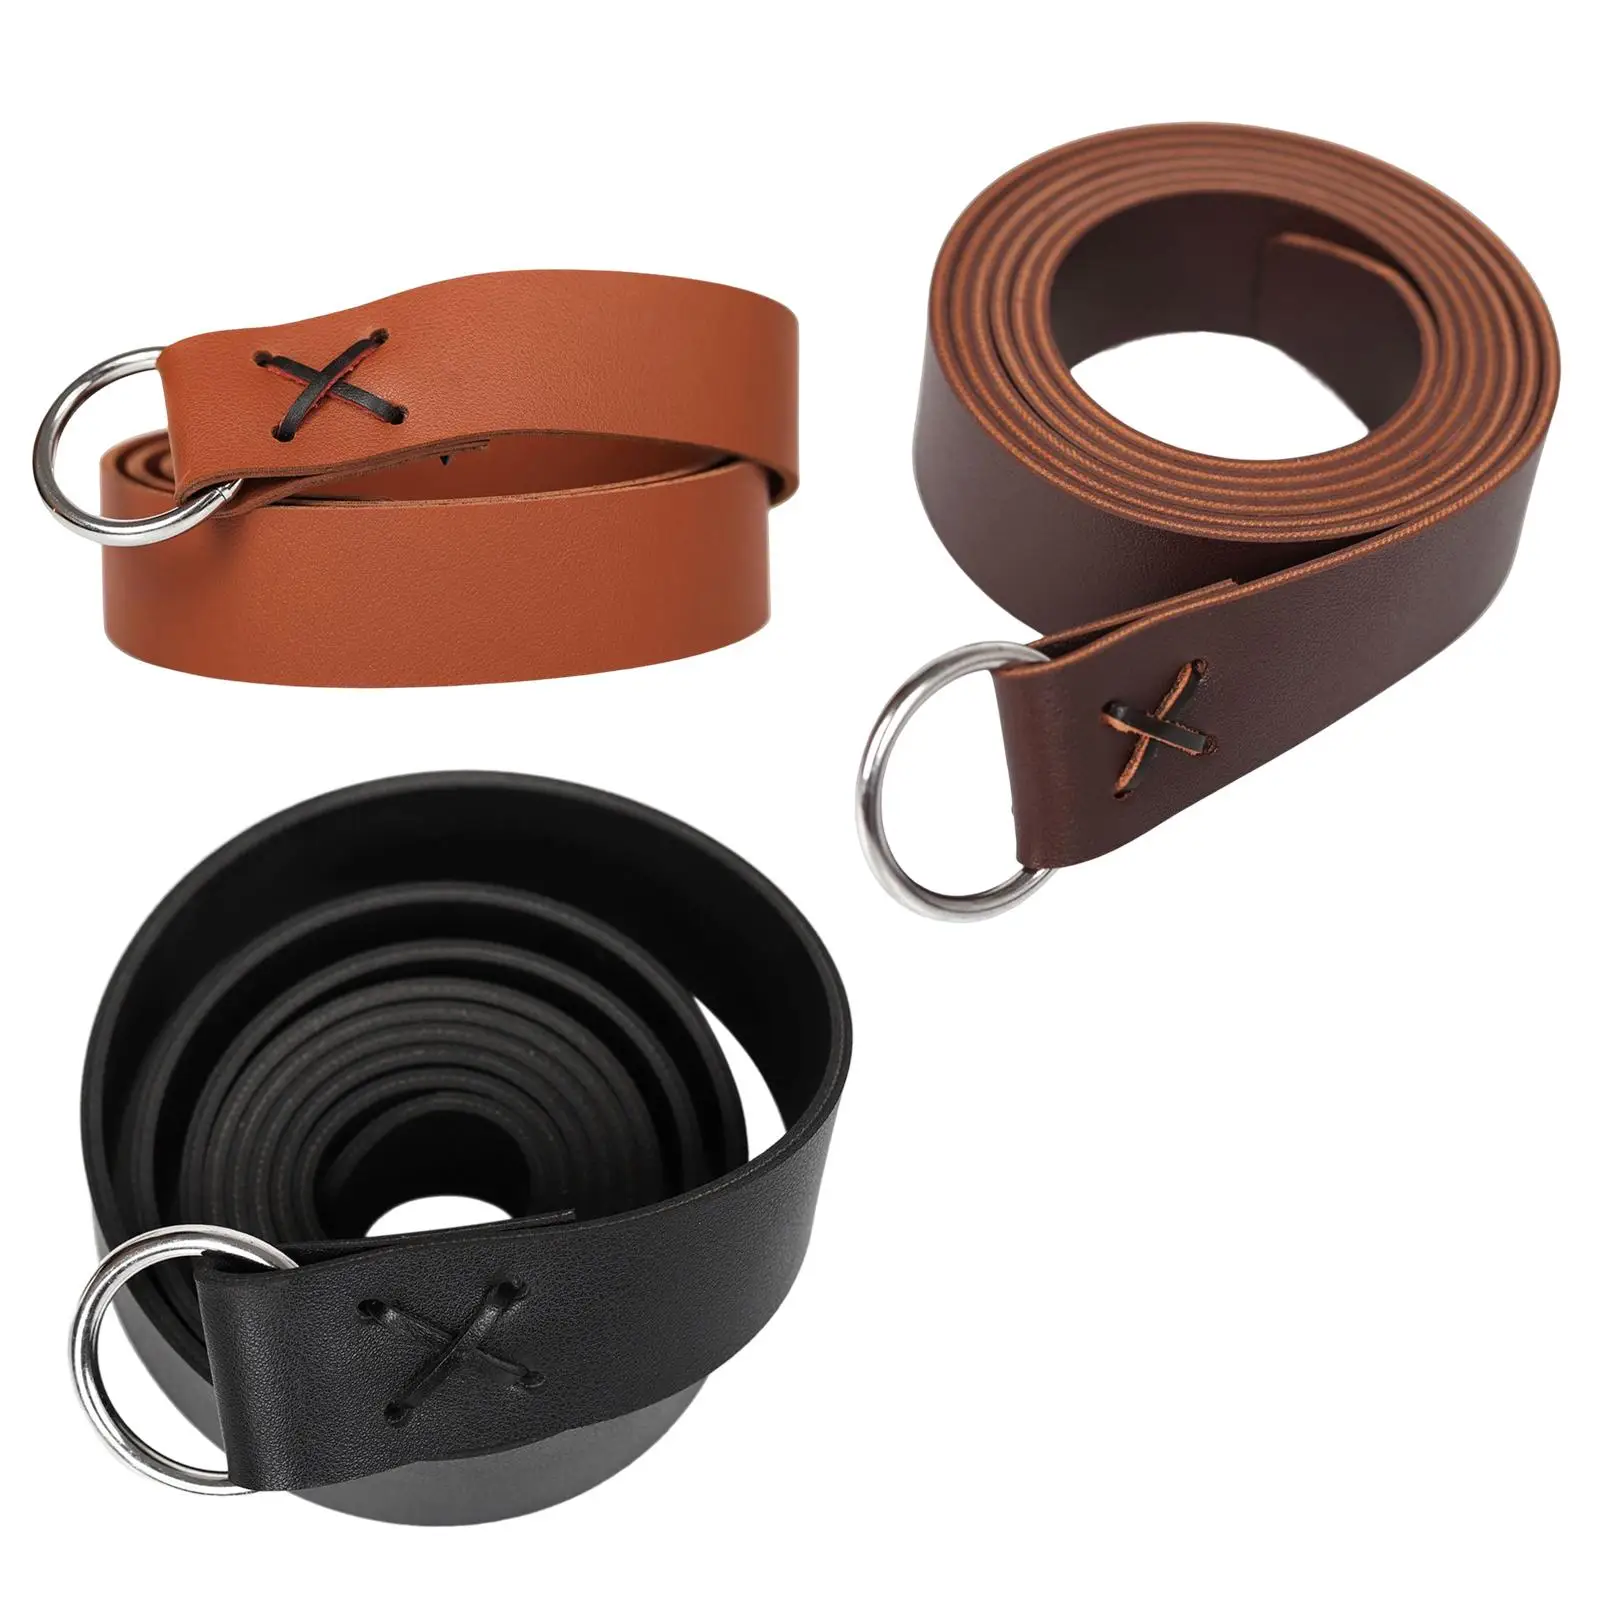 Leather Medieval Belt Waistband Costume Accessories Knight Belt for Medieval Events Decor